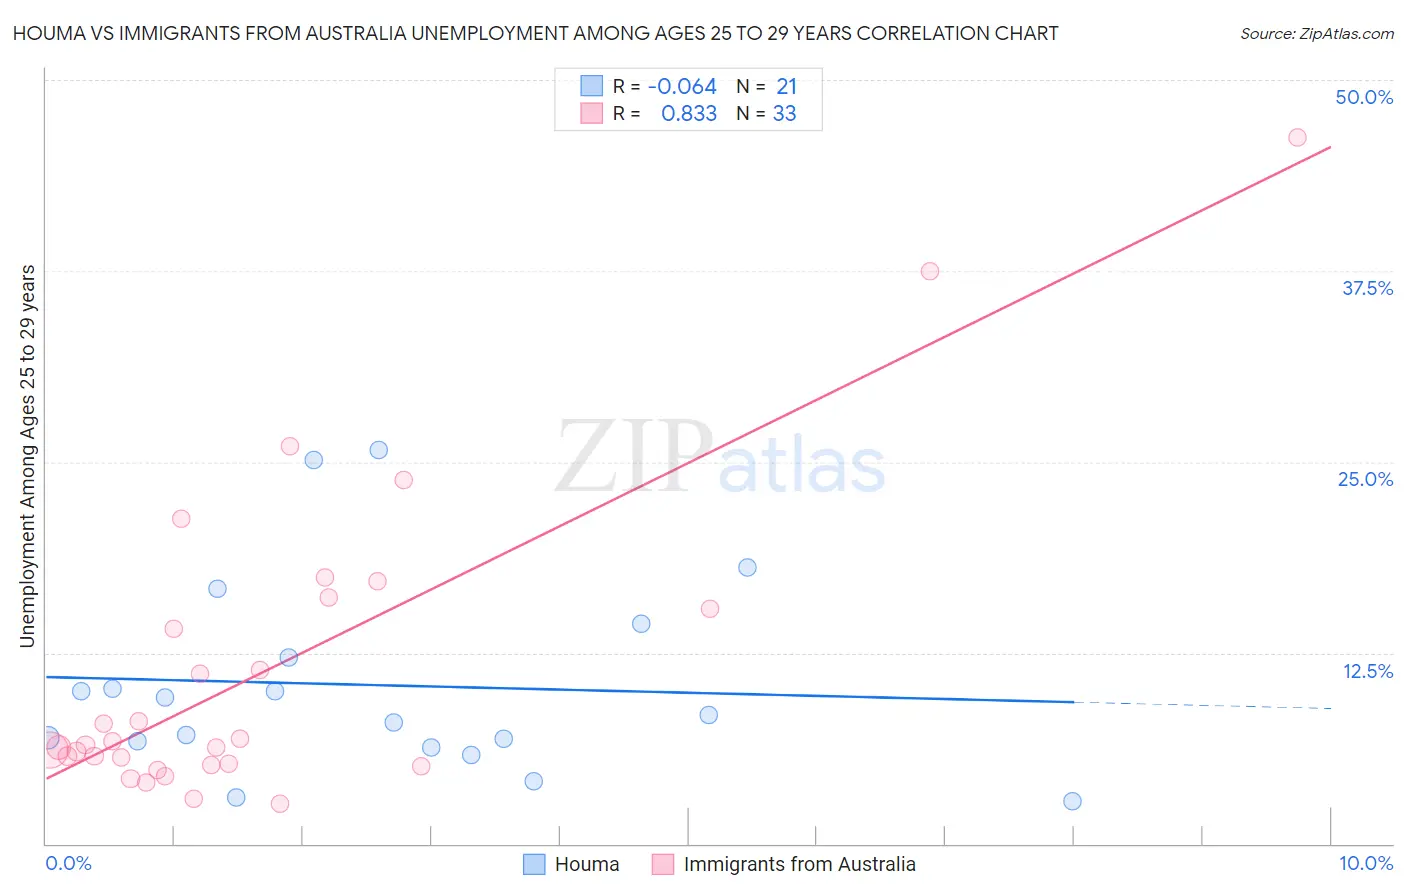 Houma vs Immigrants from Australia Unemployment Among Ages 25 to 29 years